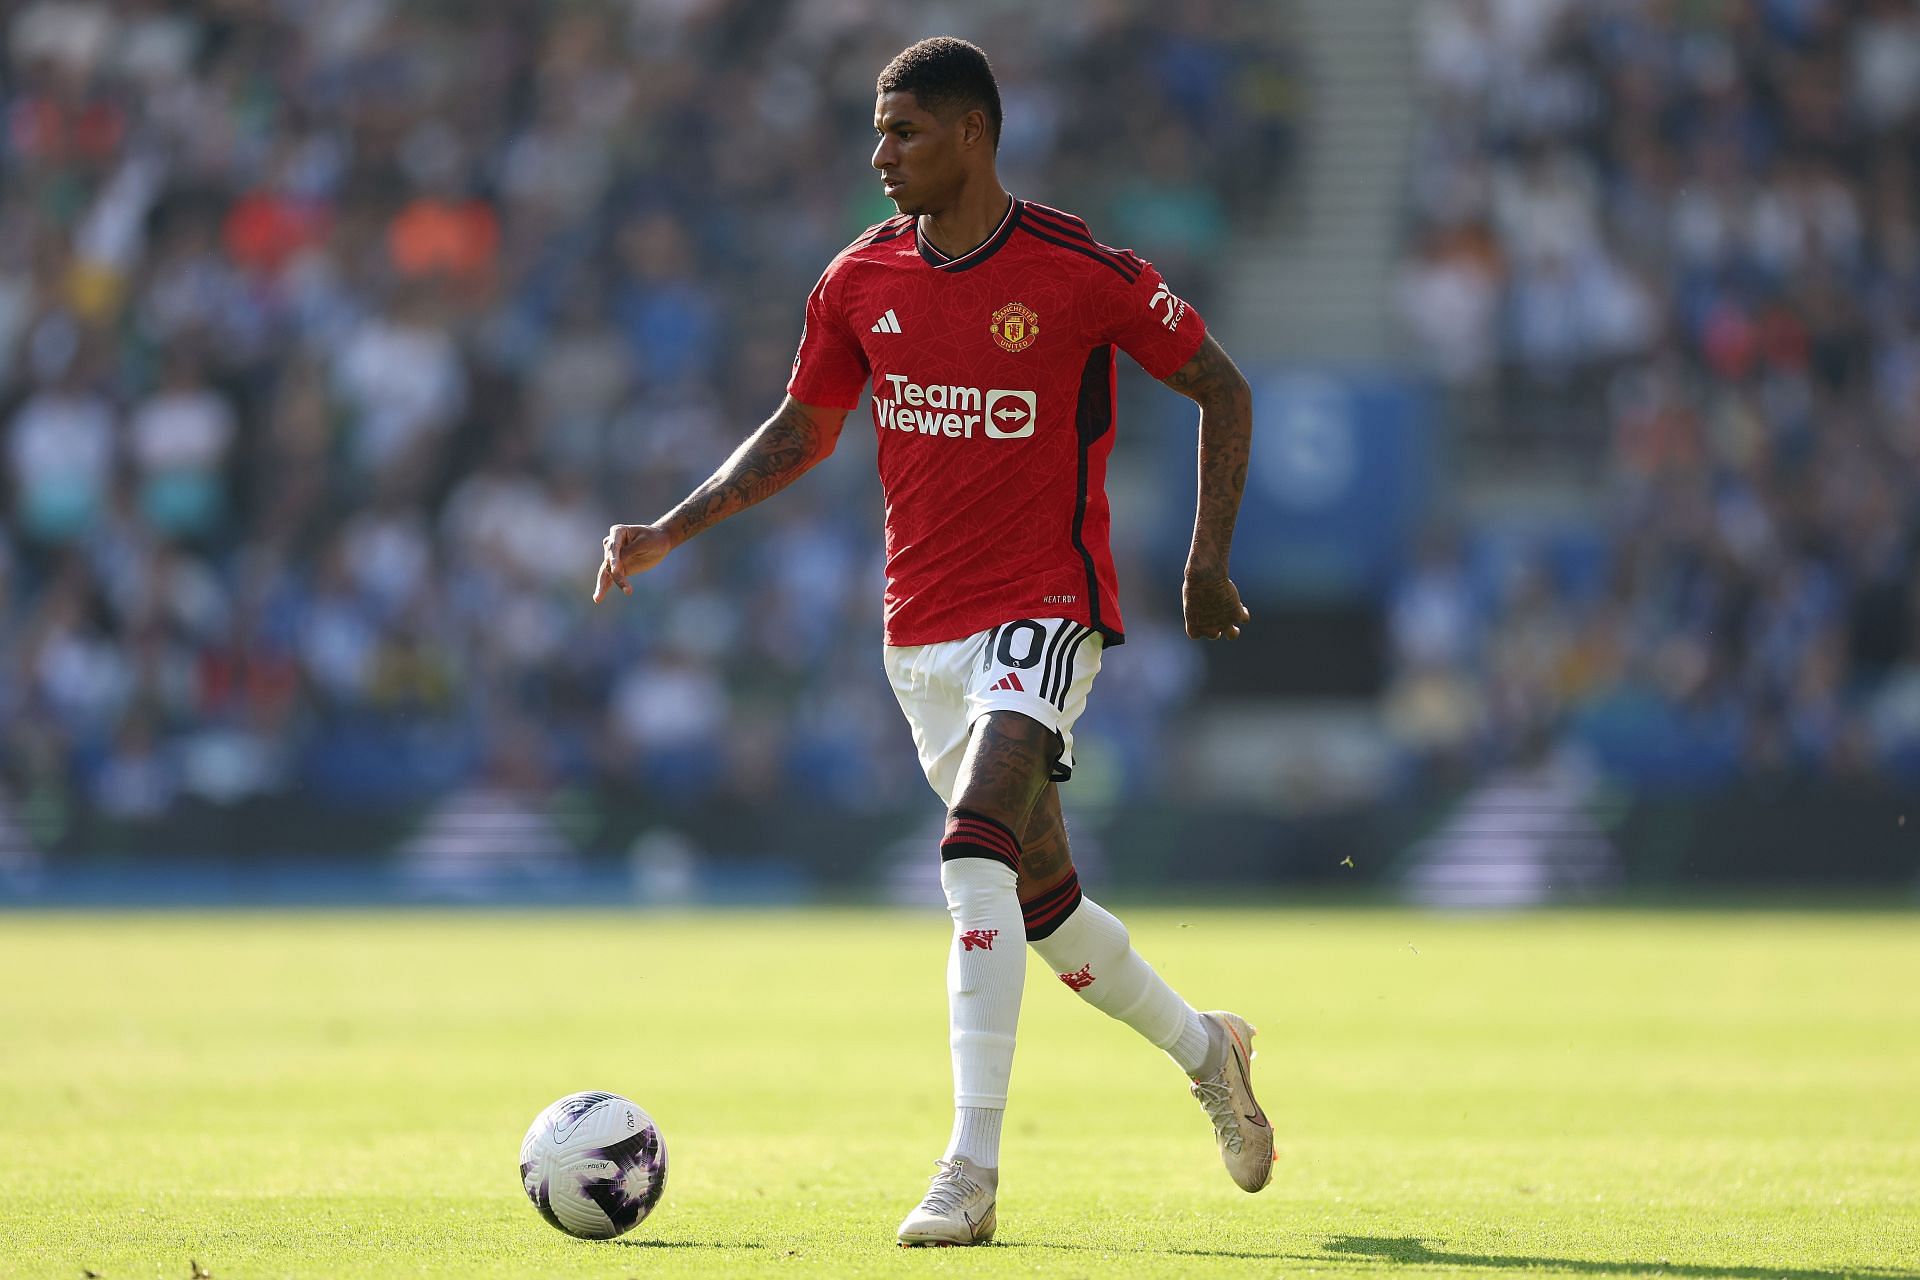 Manchester United star driving around in Marcus Rashford’s car sent to hospital after being involved in crash with suspected drunk driver: Reports